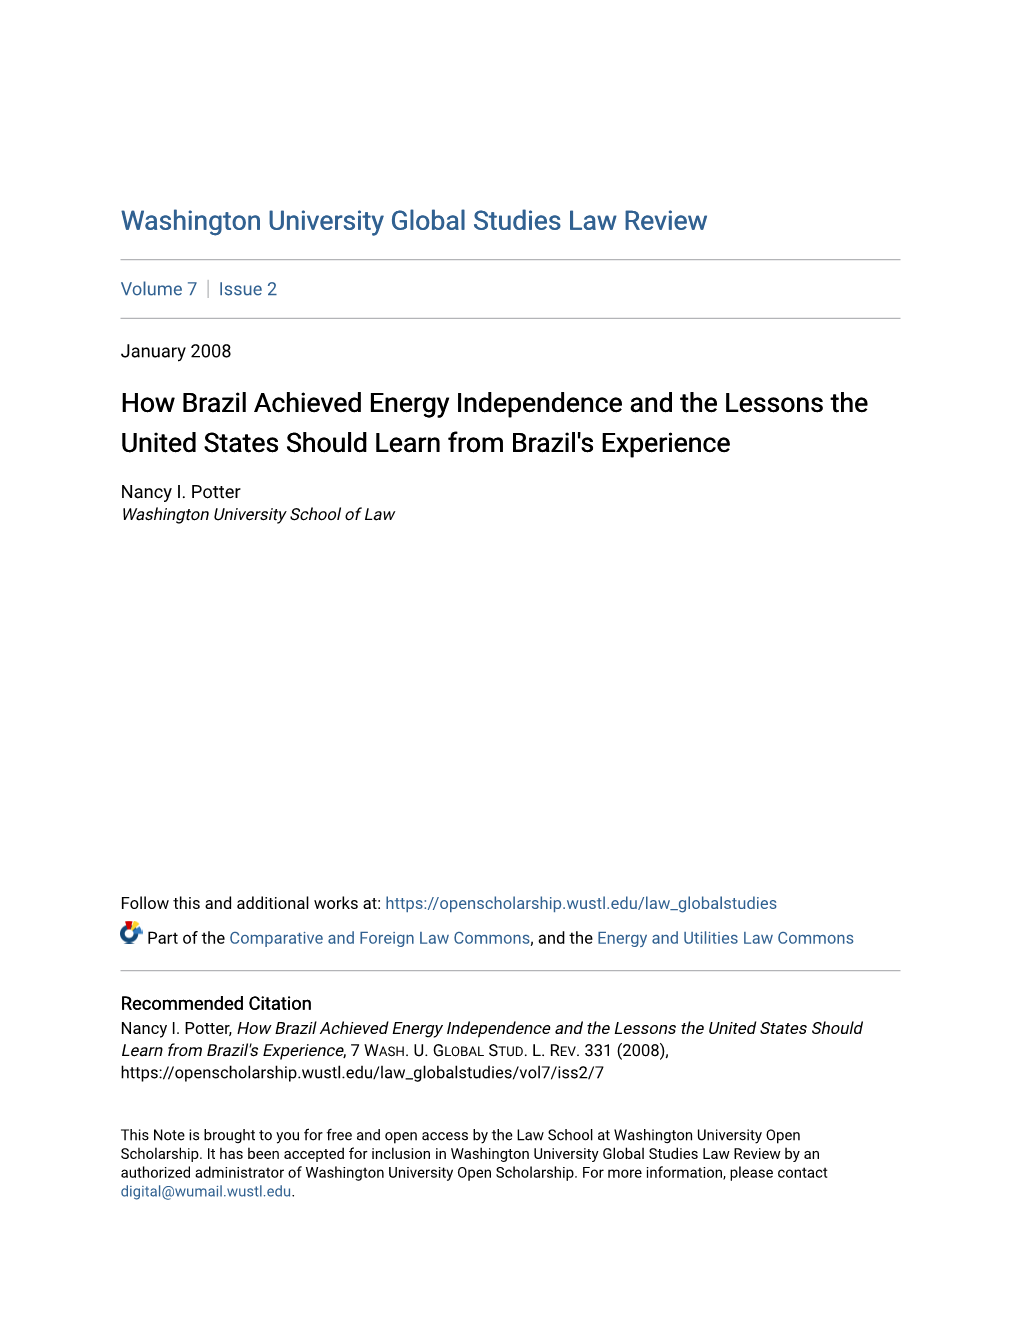 How Brazil Achieved Energy Independence and the Lessons the United States Should Learn from Brazil's Experience